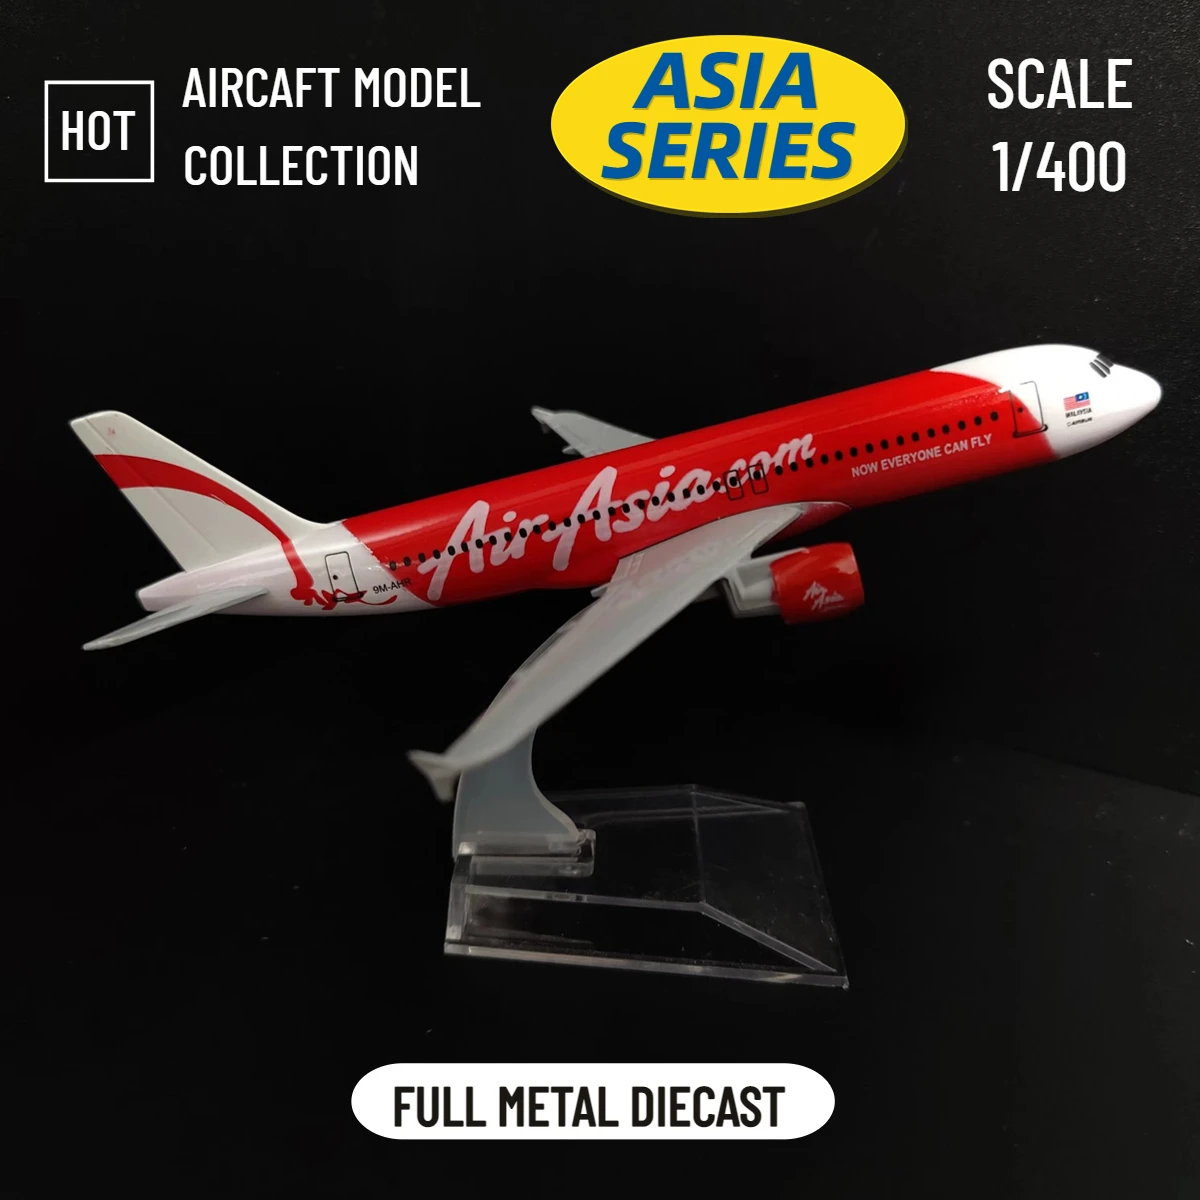 

Scale 1:400 Metal Planes Replica 15cm Air Asia Red White Airline Boeing Aircraft Model Aviation Miniature Xmas Gfit for Boy Girl